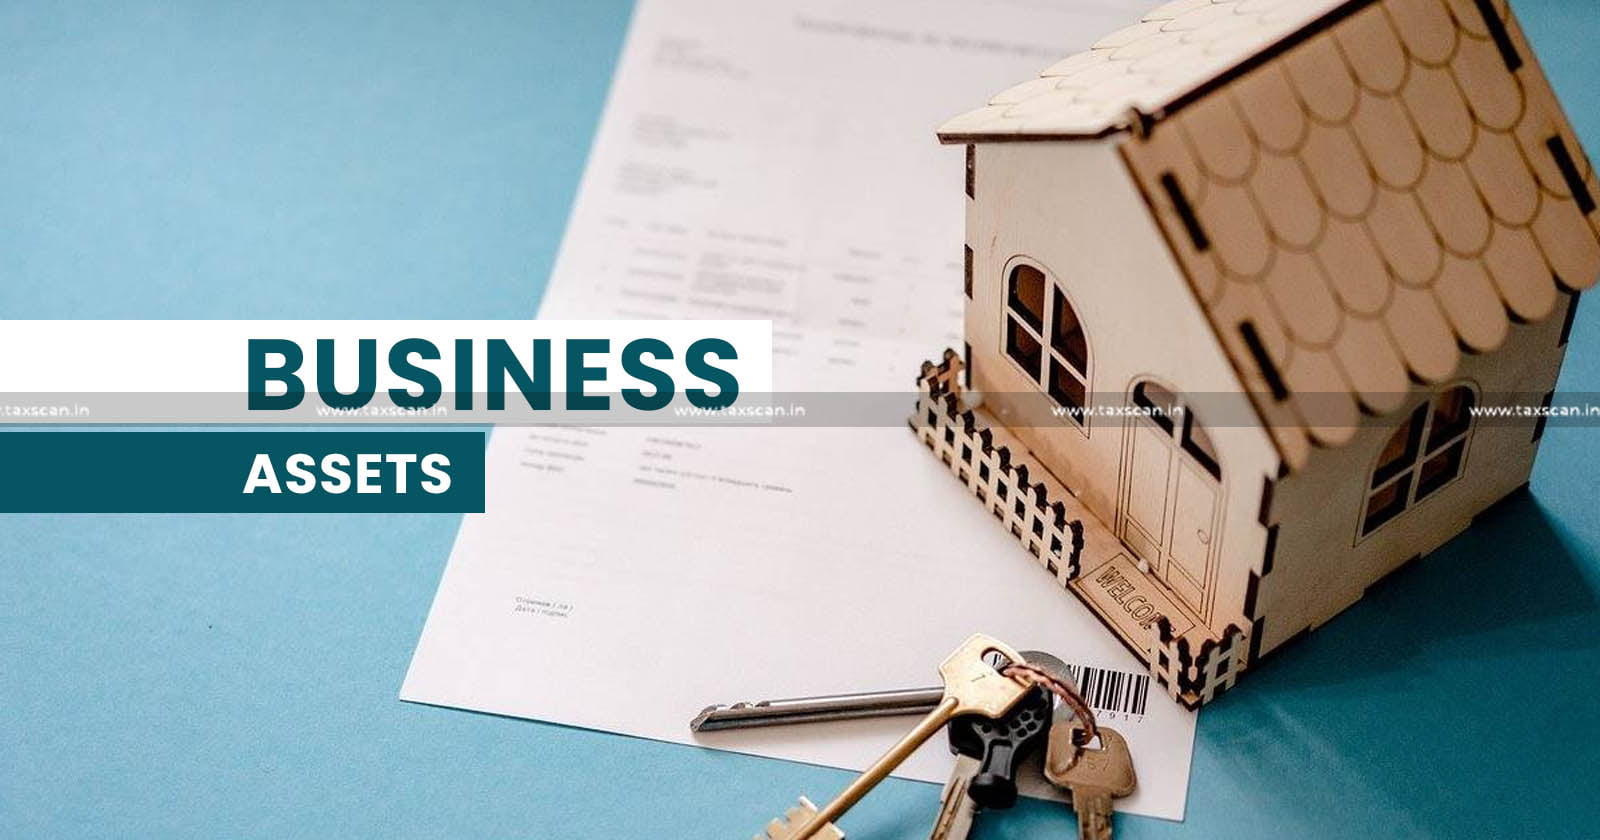 Property Not Used for Business Purpose cannot be Treated as Business Assets - ITAT disallows Expenses - Property Not Used for Business Purpose - Business Assets - ITAT - Taxscan